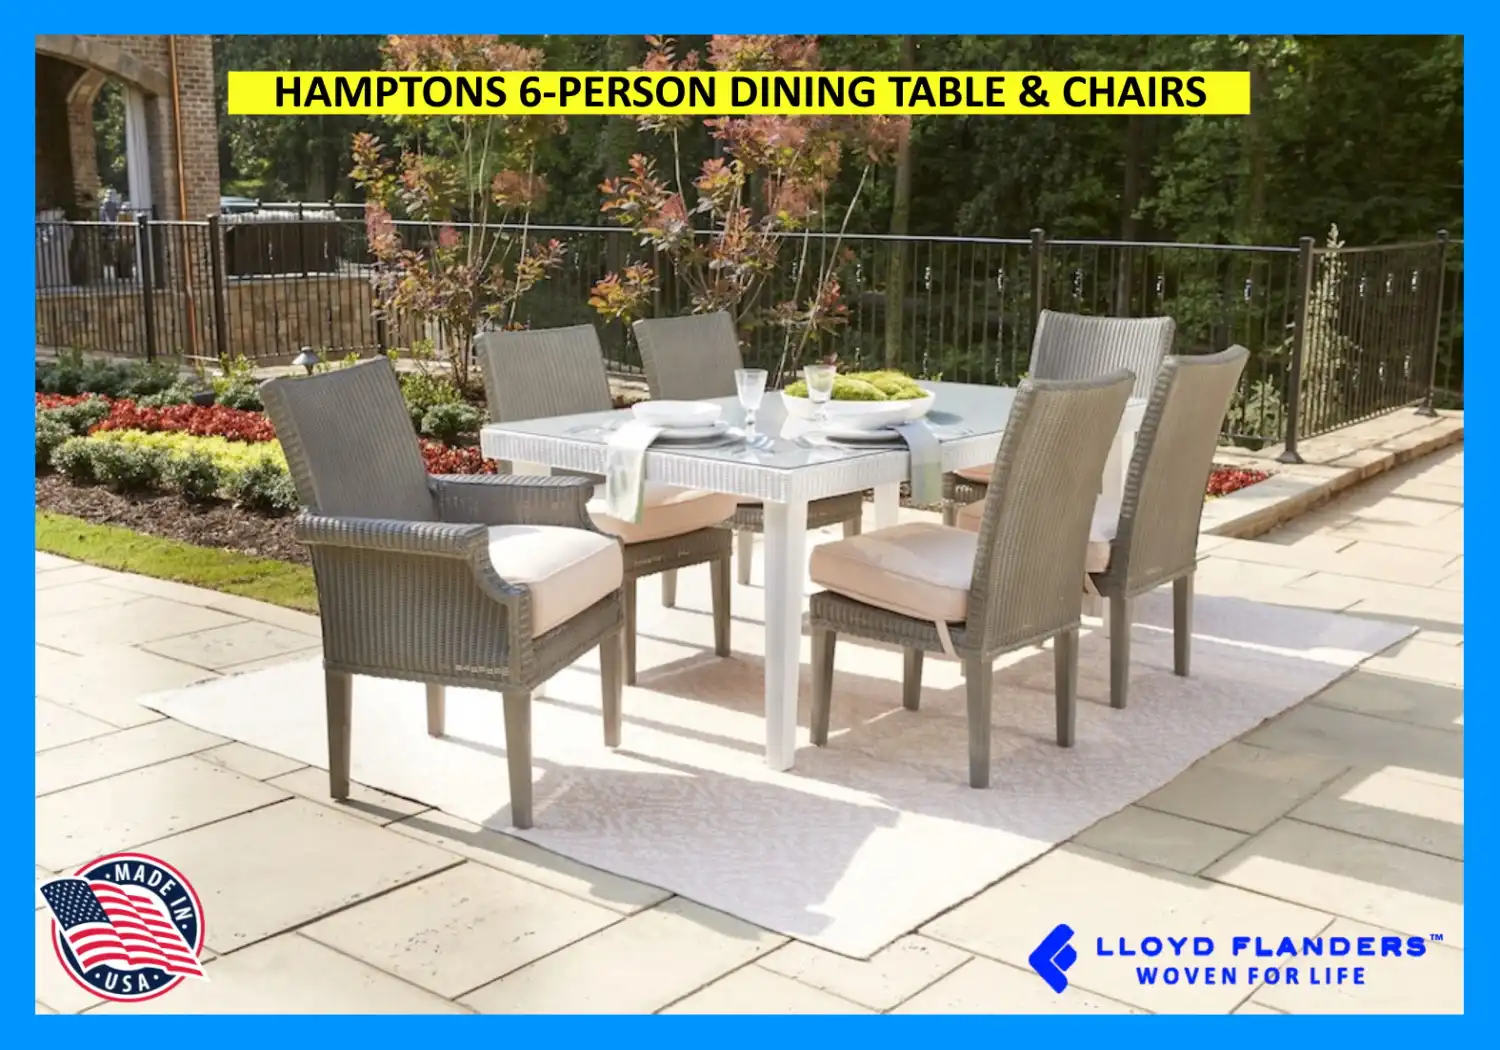 HAMPTONS 6-PERSON DINING TABLE & CHAIRS